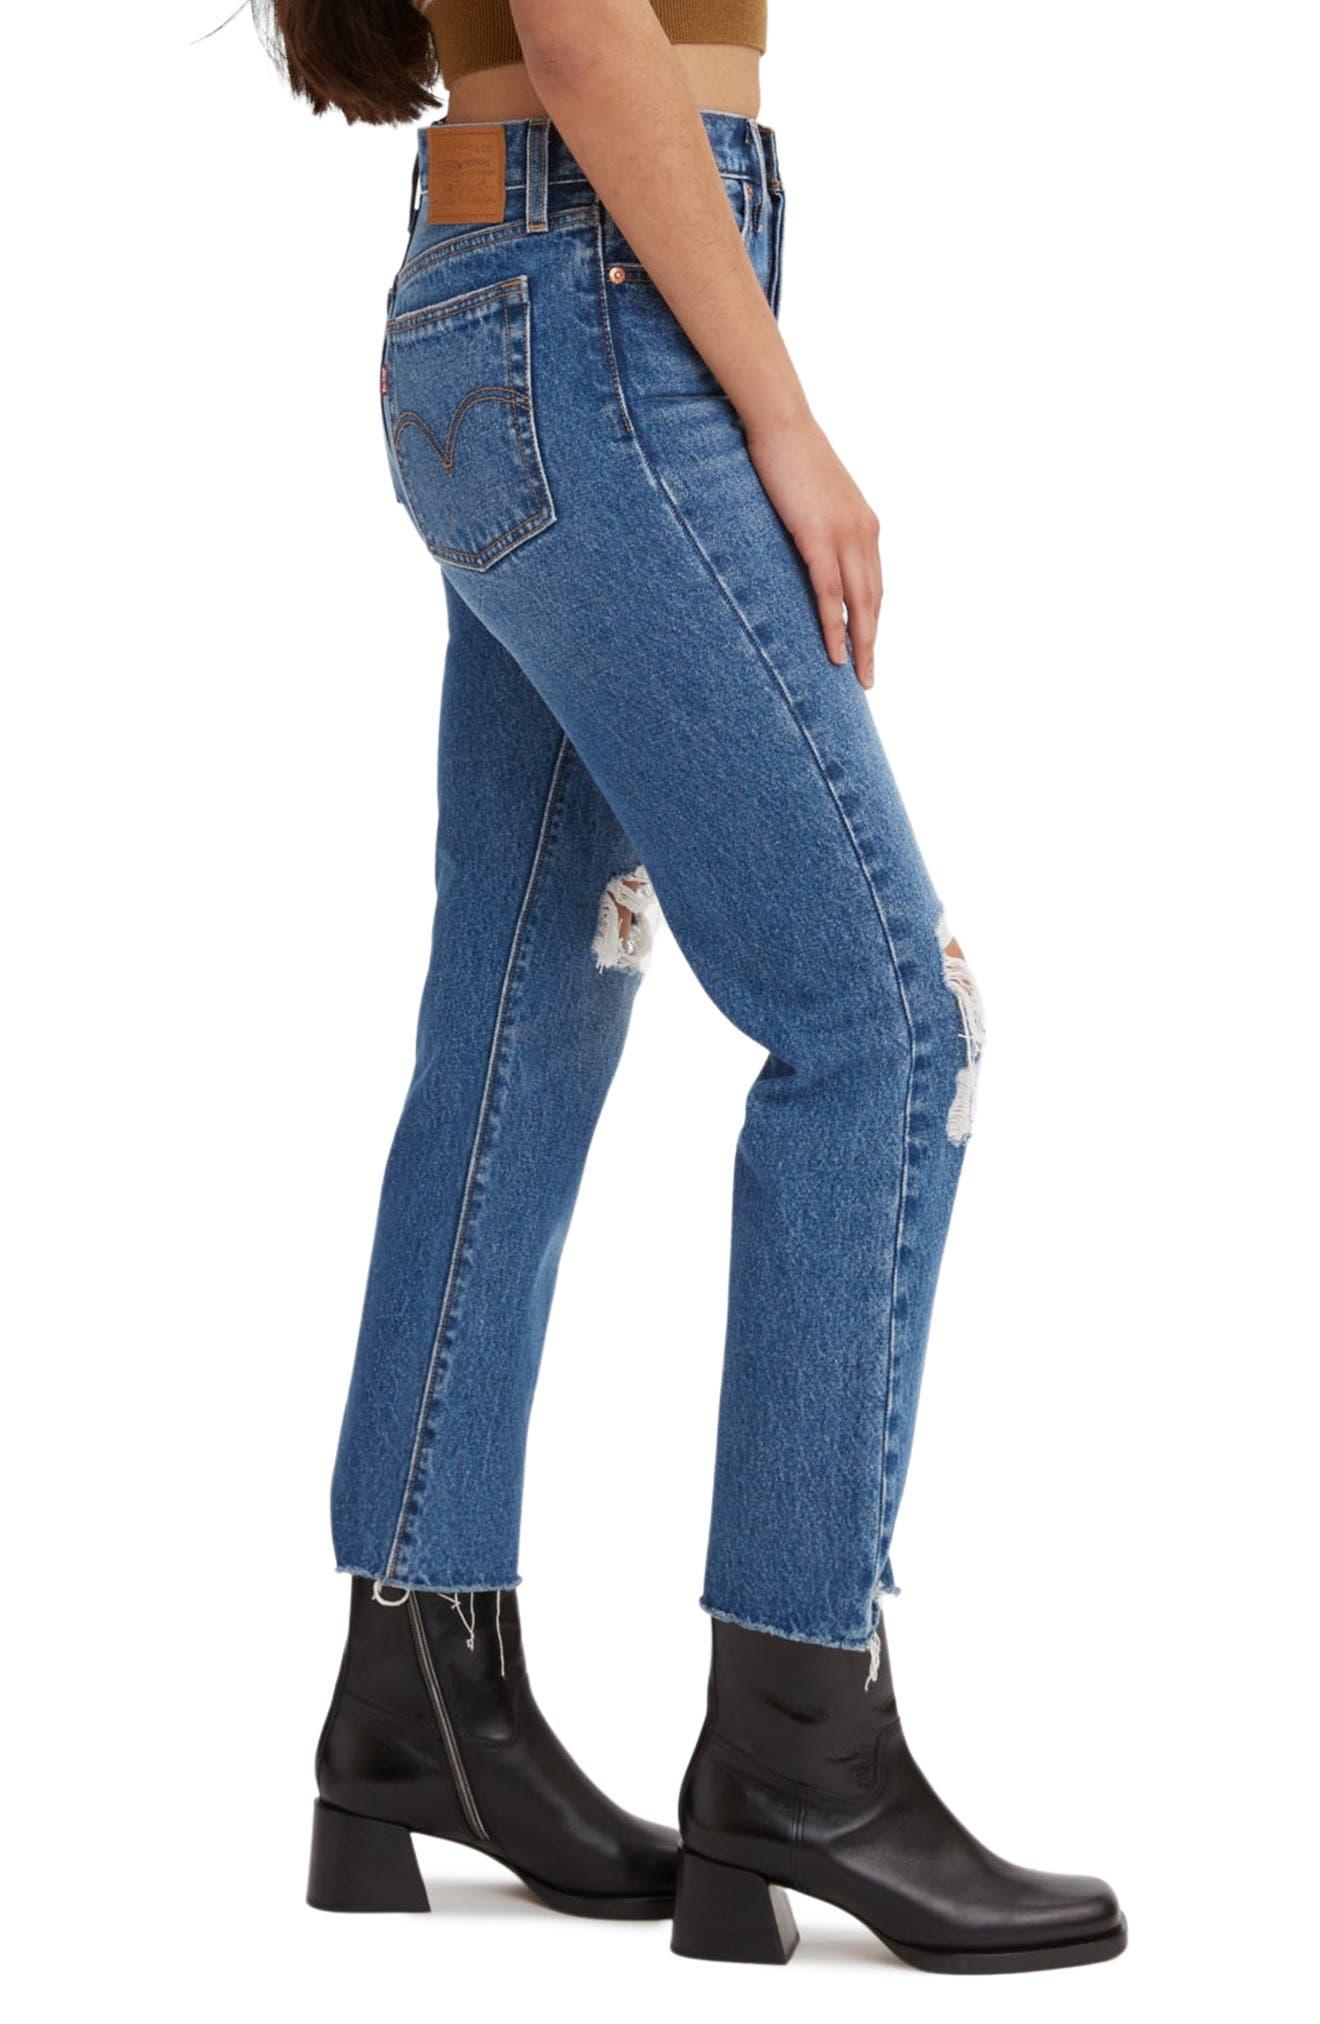 Levi's Wedgie Ripped High Waist Crop Straight Leg Jeans in Blue